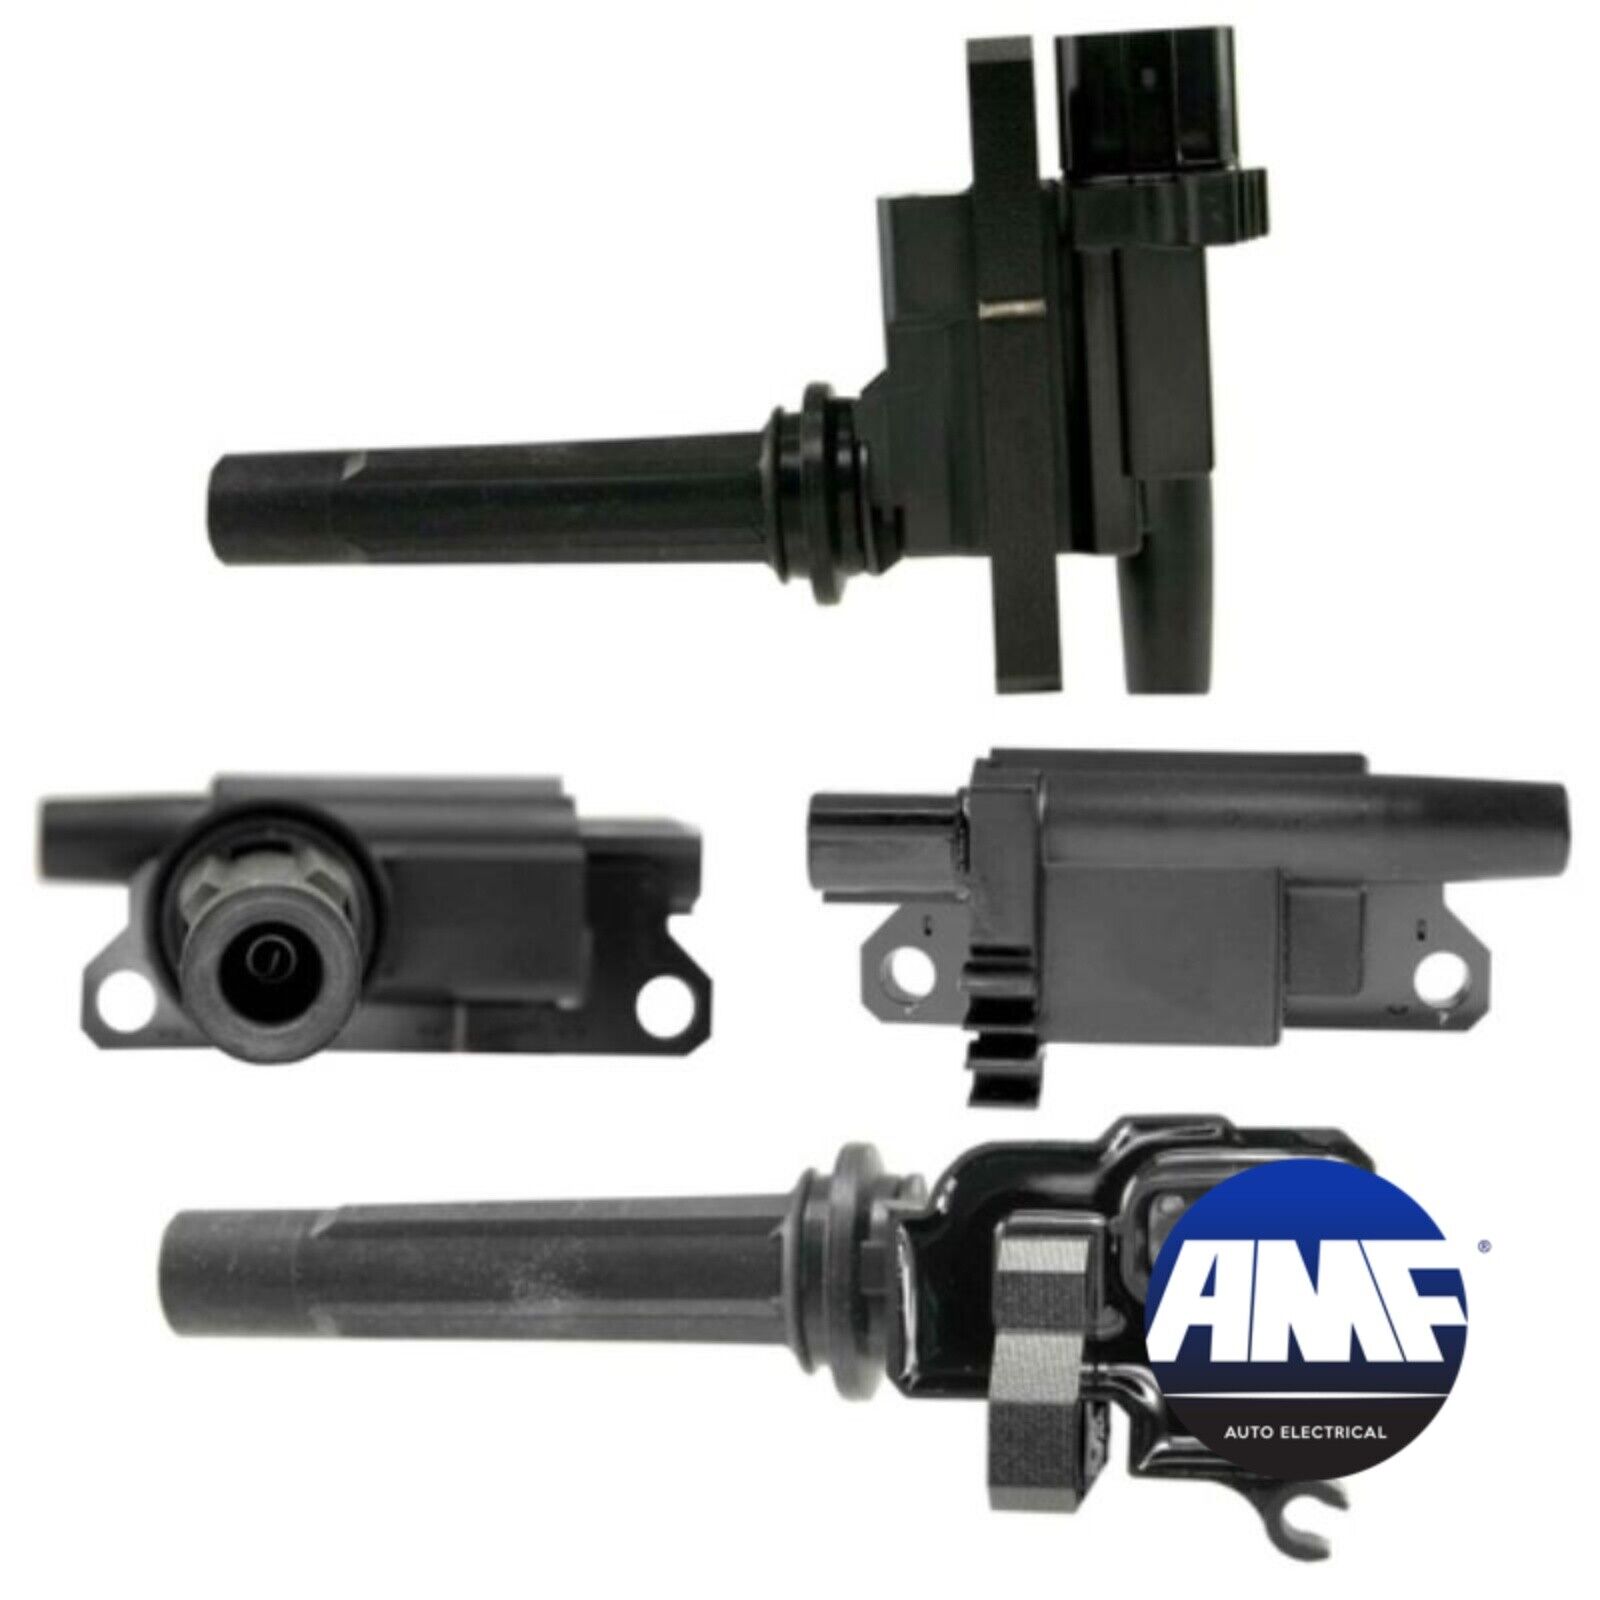 New Ignition Coil for Ford Mazda Protege 1.6L 99 03 - UF276